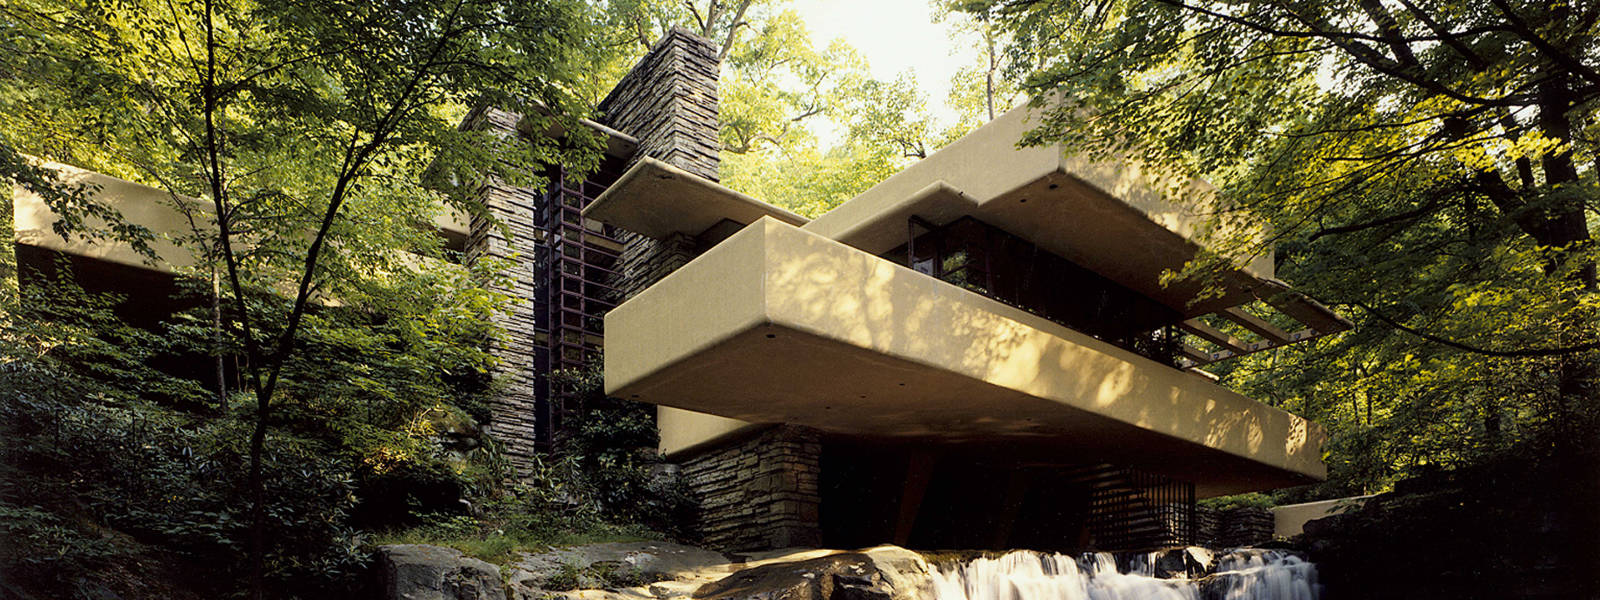 Fallingwater Facts